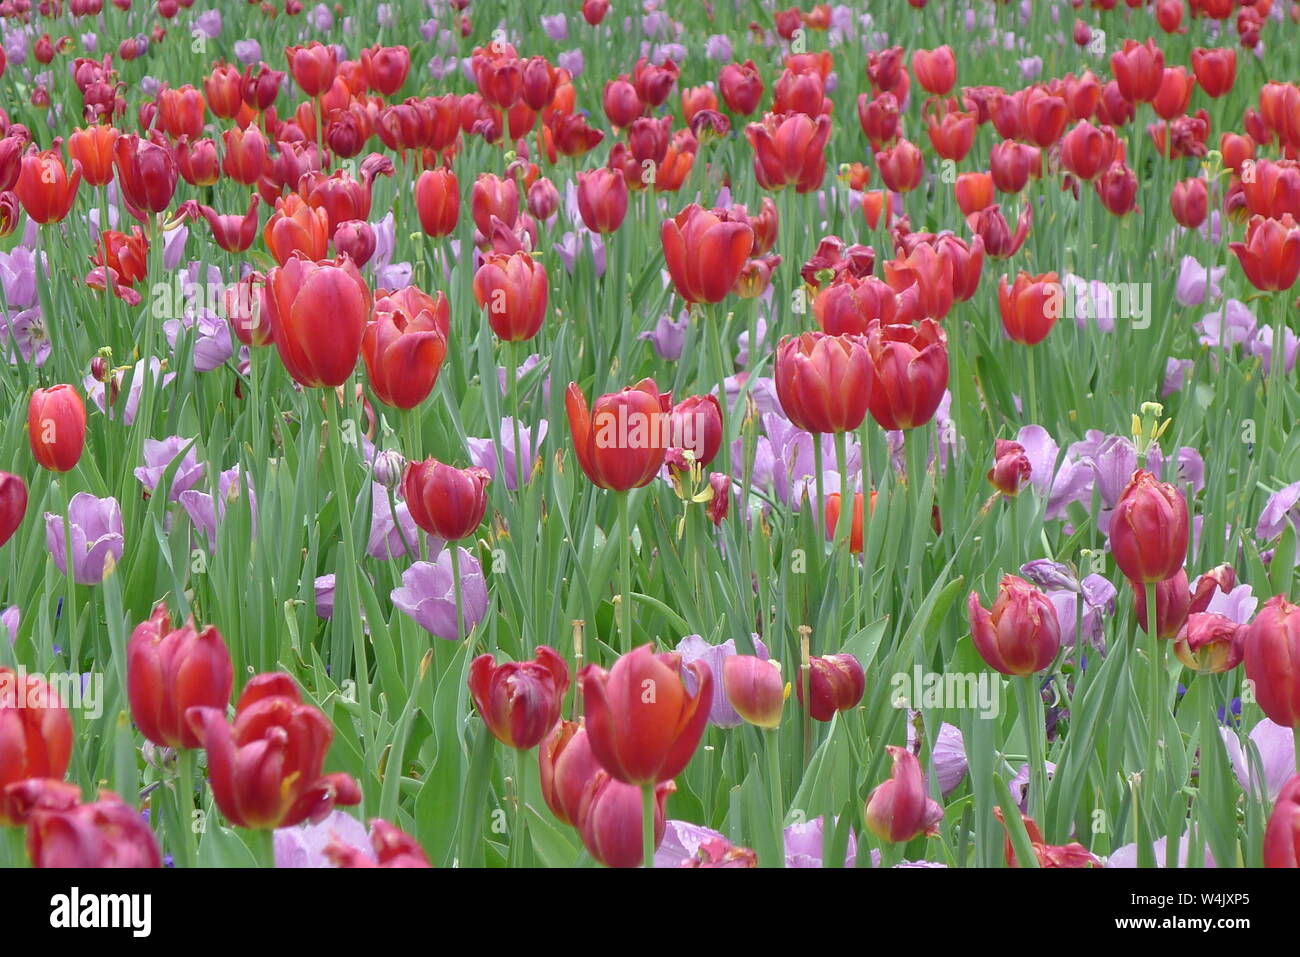 Red And Purple Tulips In Dallas Arboretum And Botanical Garden